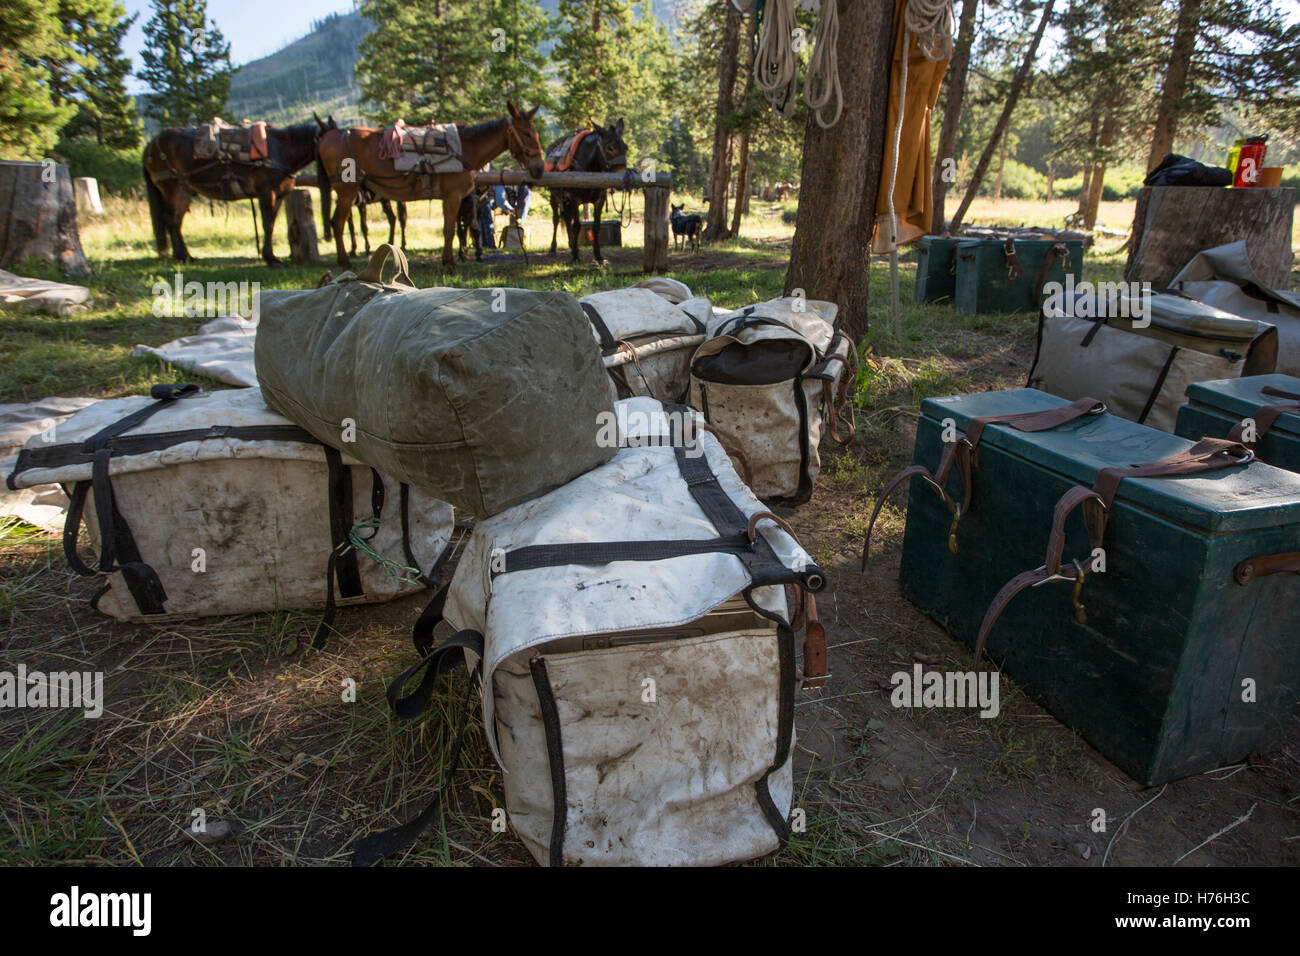 Gerle a backcountry cavallo pack-in camp in Montana, cavalli e muli in background. Foto Stock